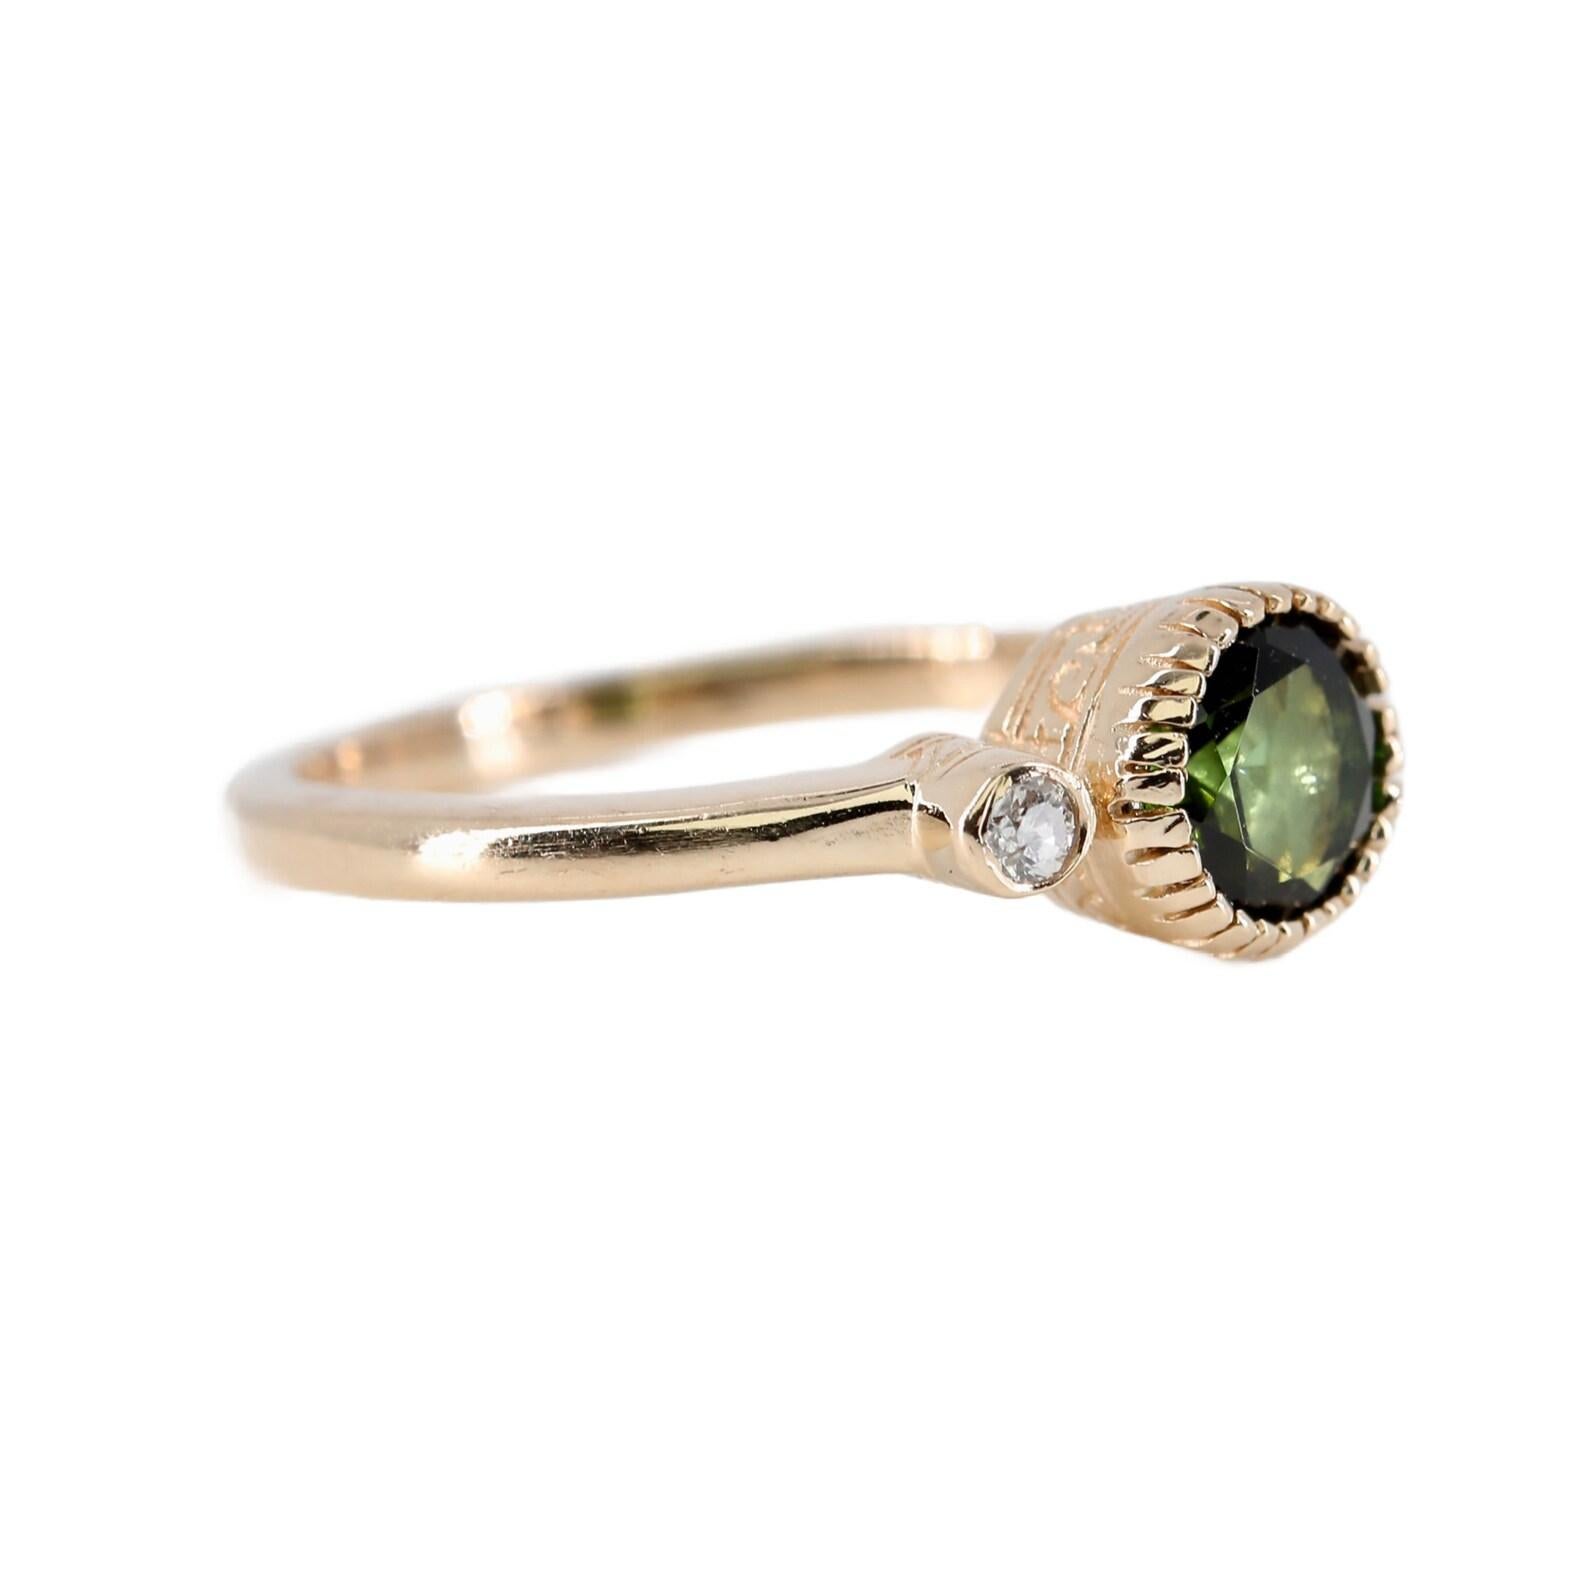 A vintage three stone green tourmaline, and diamond ring. Crafted in 14 karat yellow gold, this ring is centered by a 1.00 carat natural green tourmaline. Framing the tourmaline are two diamonds of 0.08 carats. The mounting is completed by miligrain